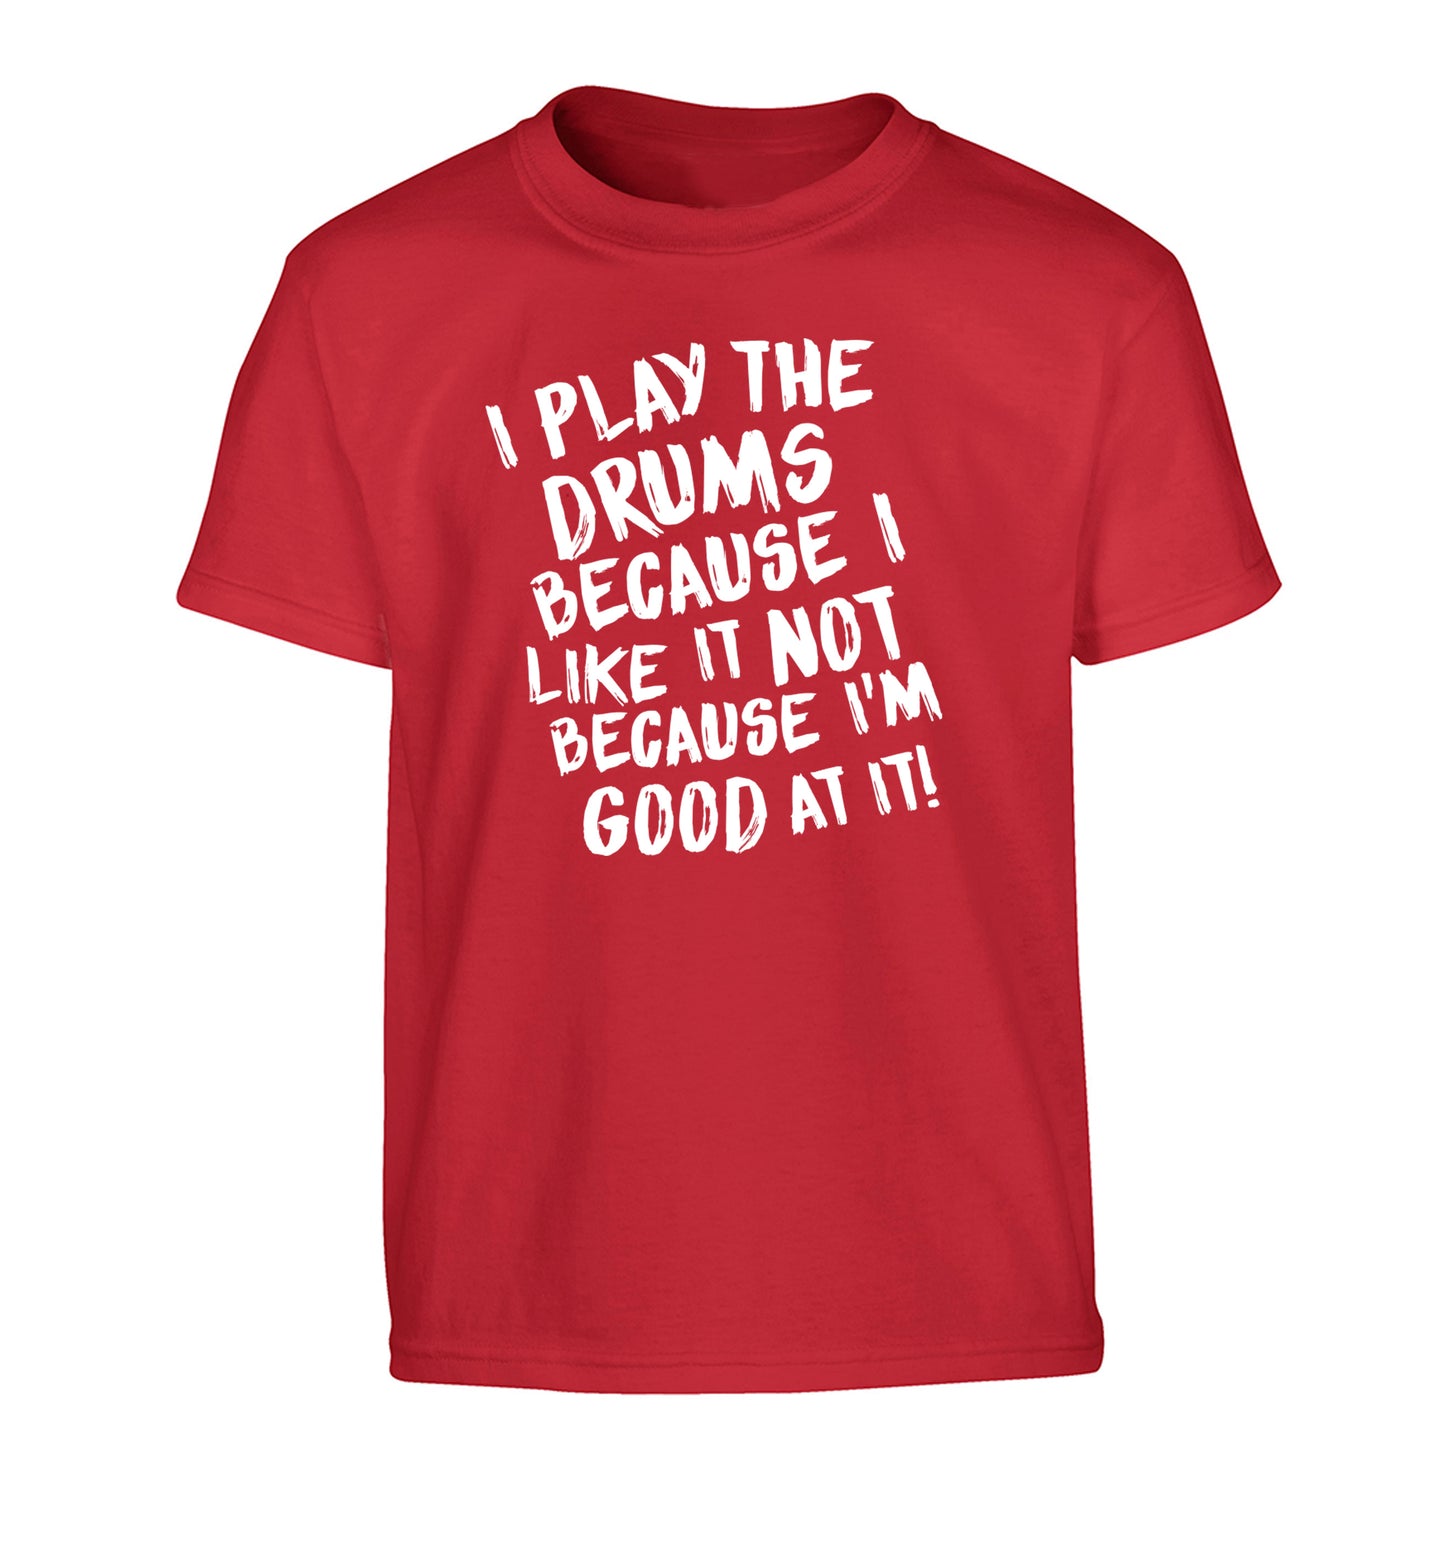 I play the drums because I like it not because I'm good at it Children's red Tshirt 12-14 Years